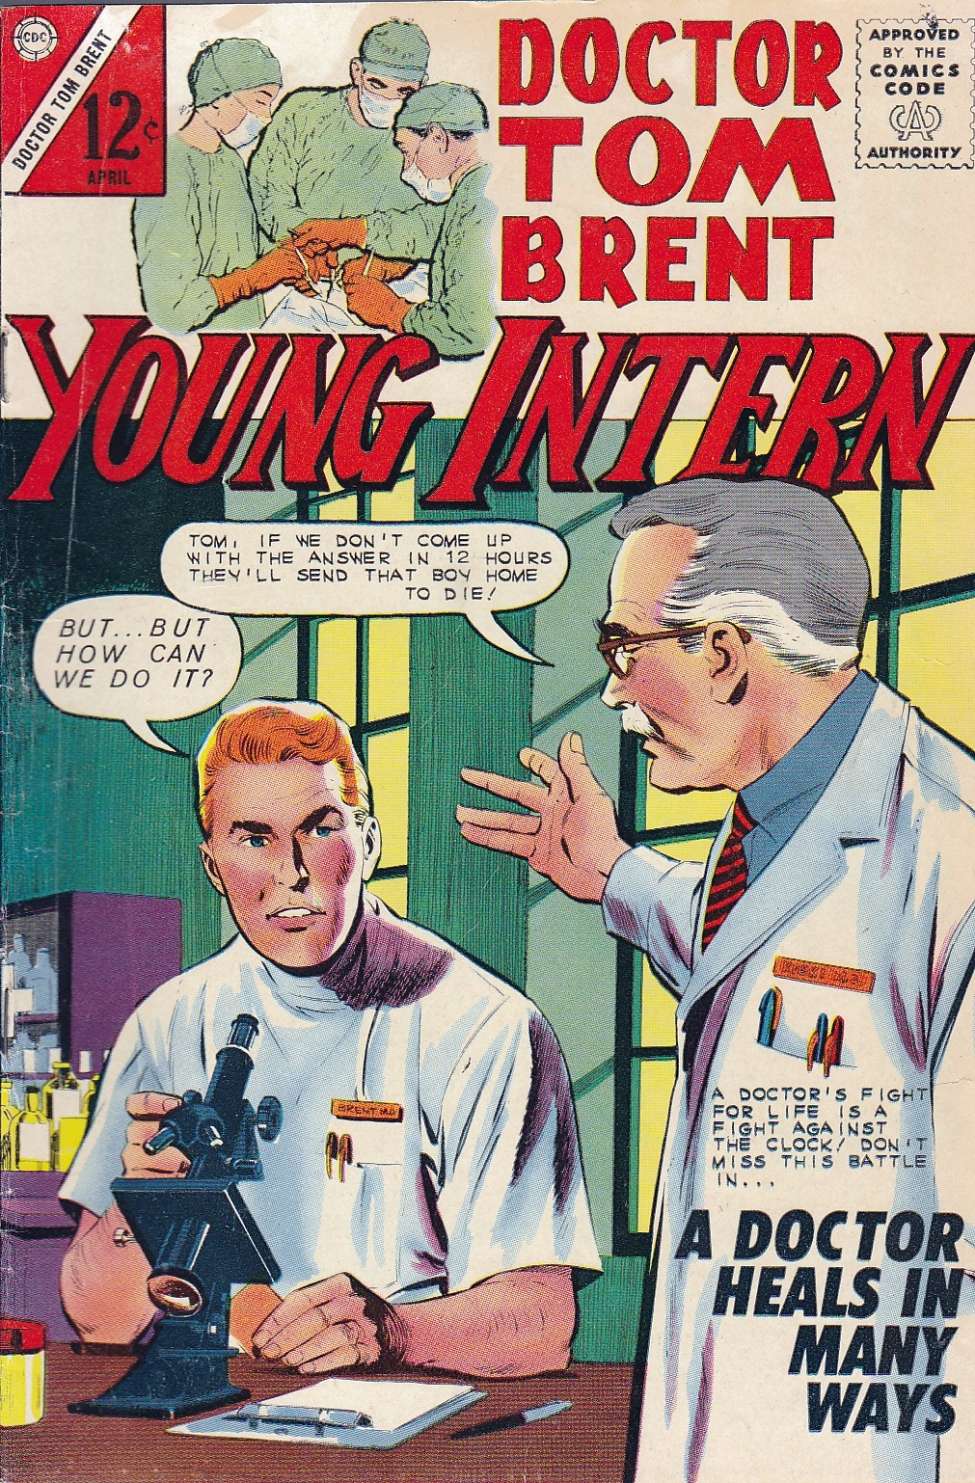 Comic Book Cover For Doctor Tom Brent, Young Intern 2 (damaged) - Version 2